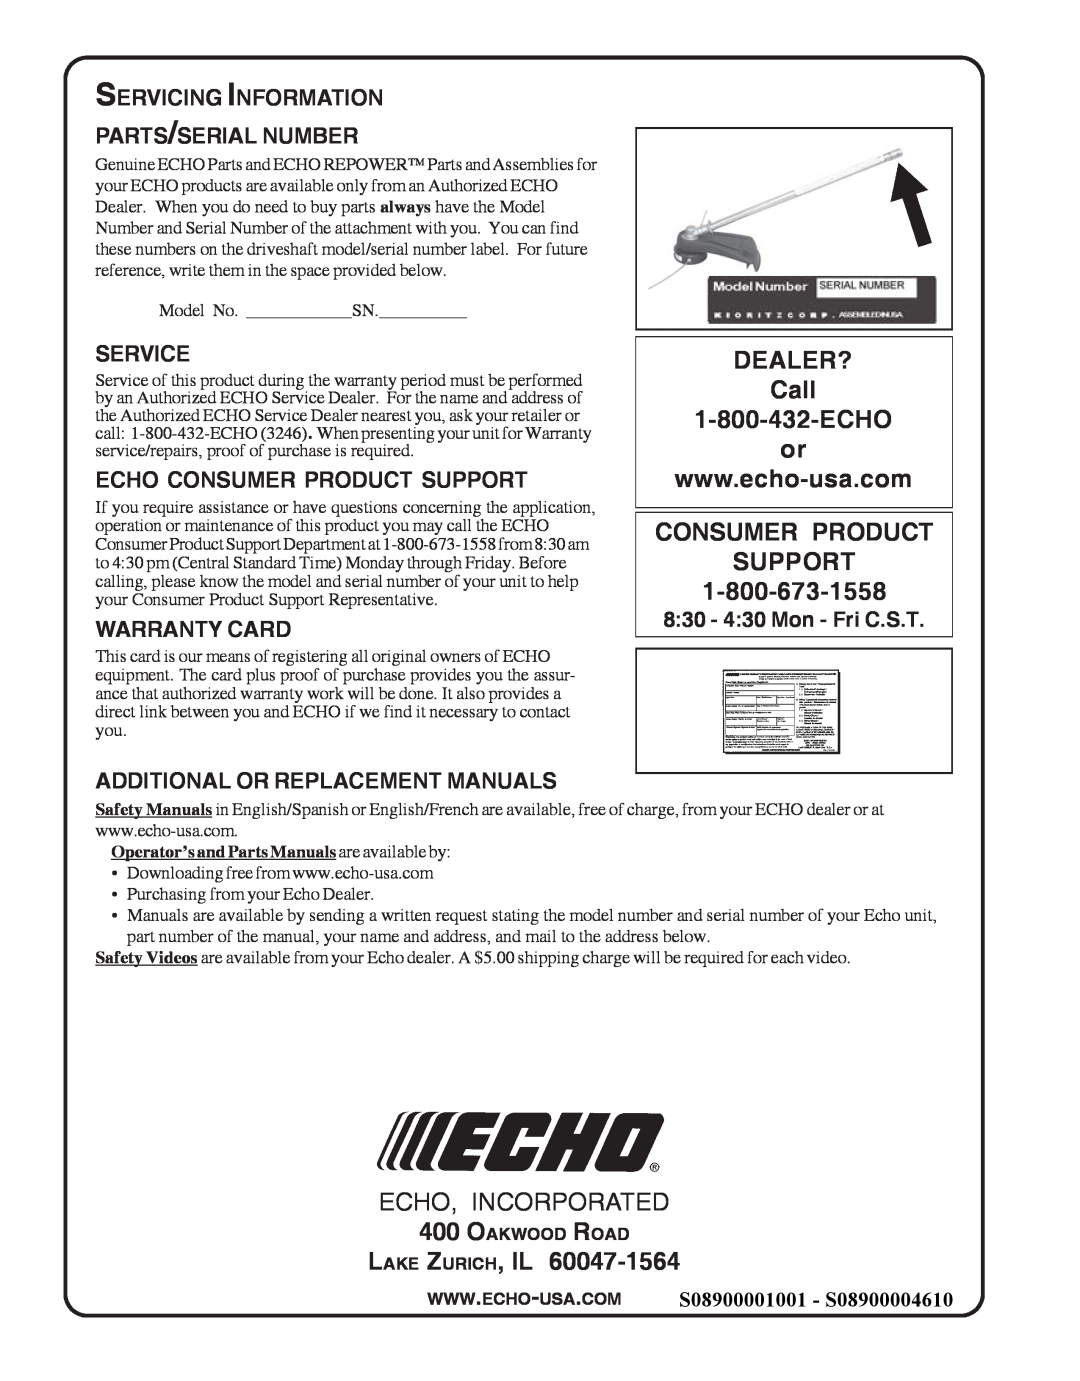 Echo PAS-230, PAS-265 DEALER? Call 1-800-432-ECHO or, Consumer Product Support, Lake Zurich, Il, Service, Warranty Card 